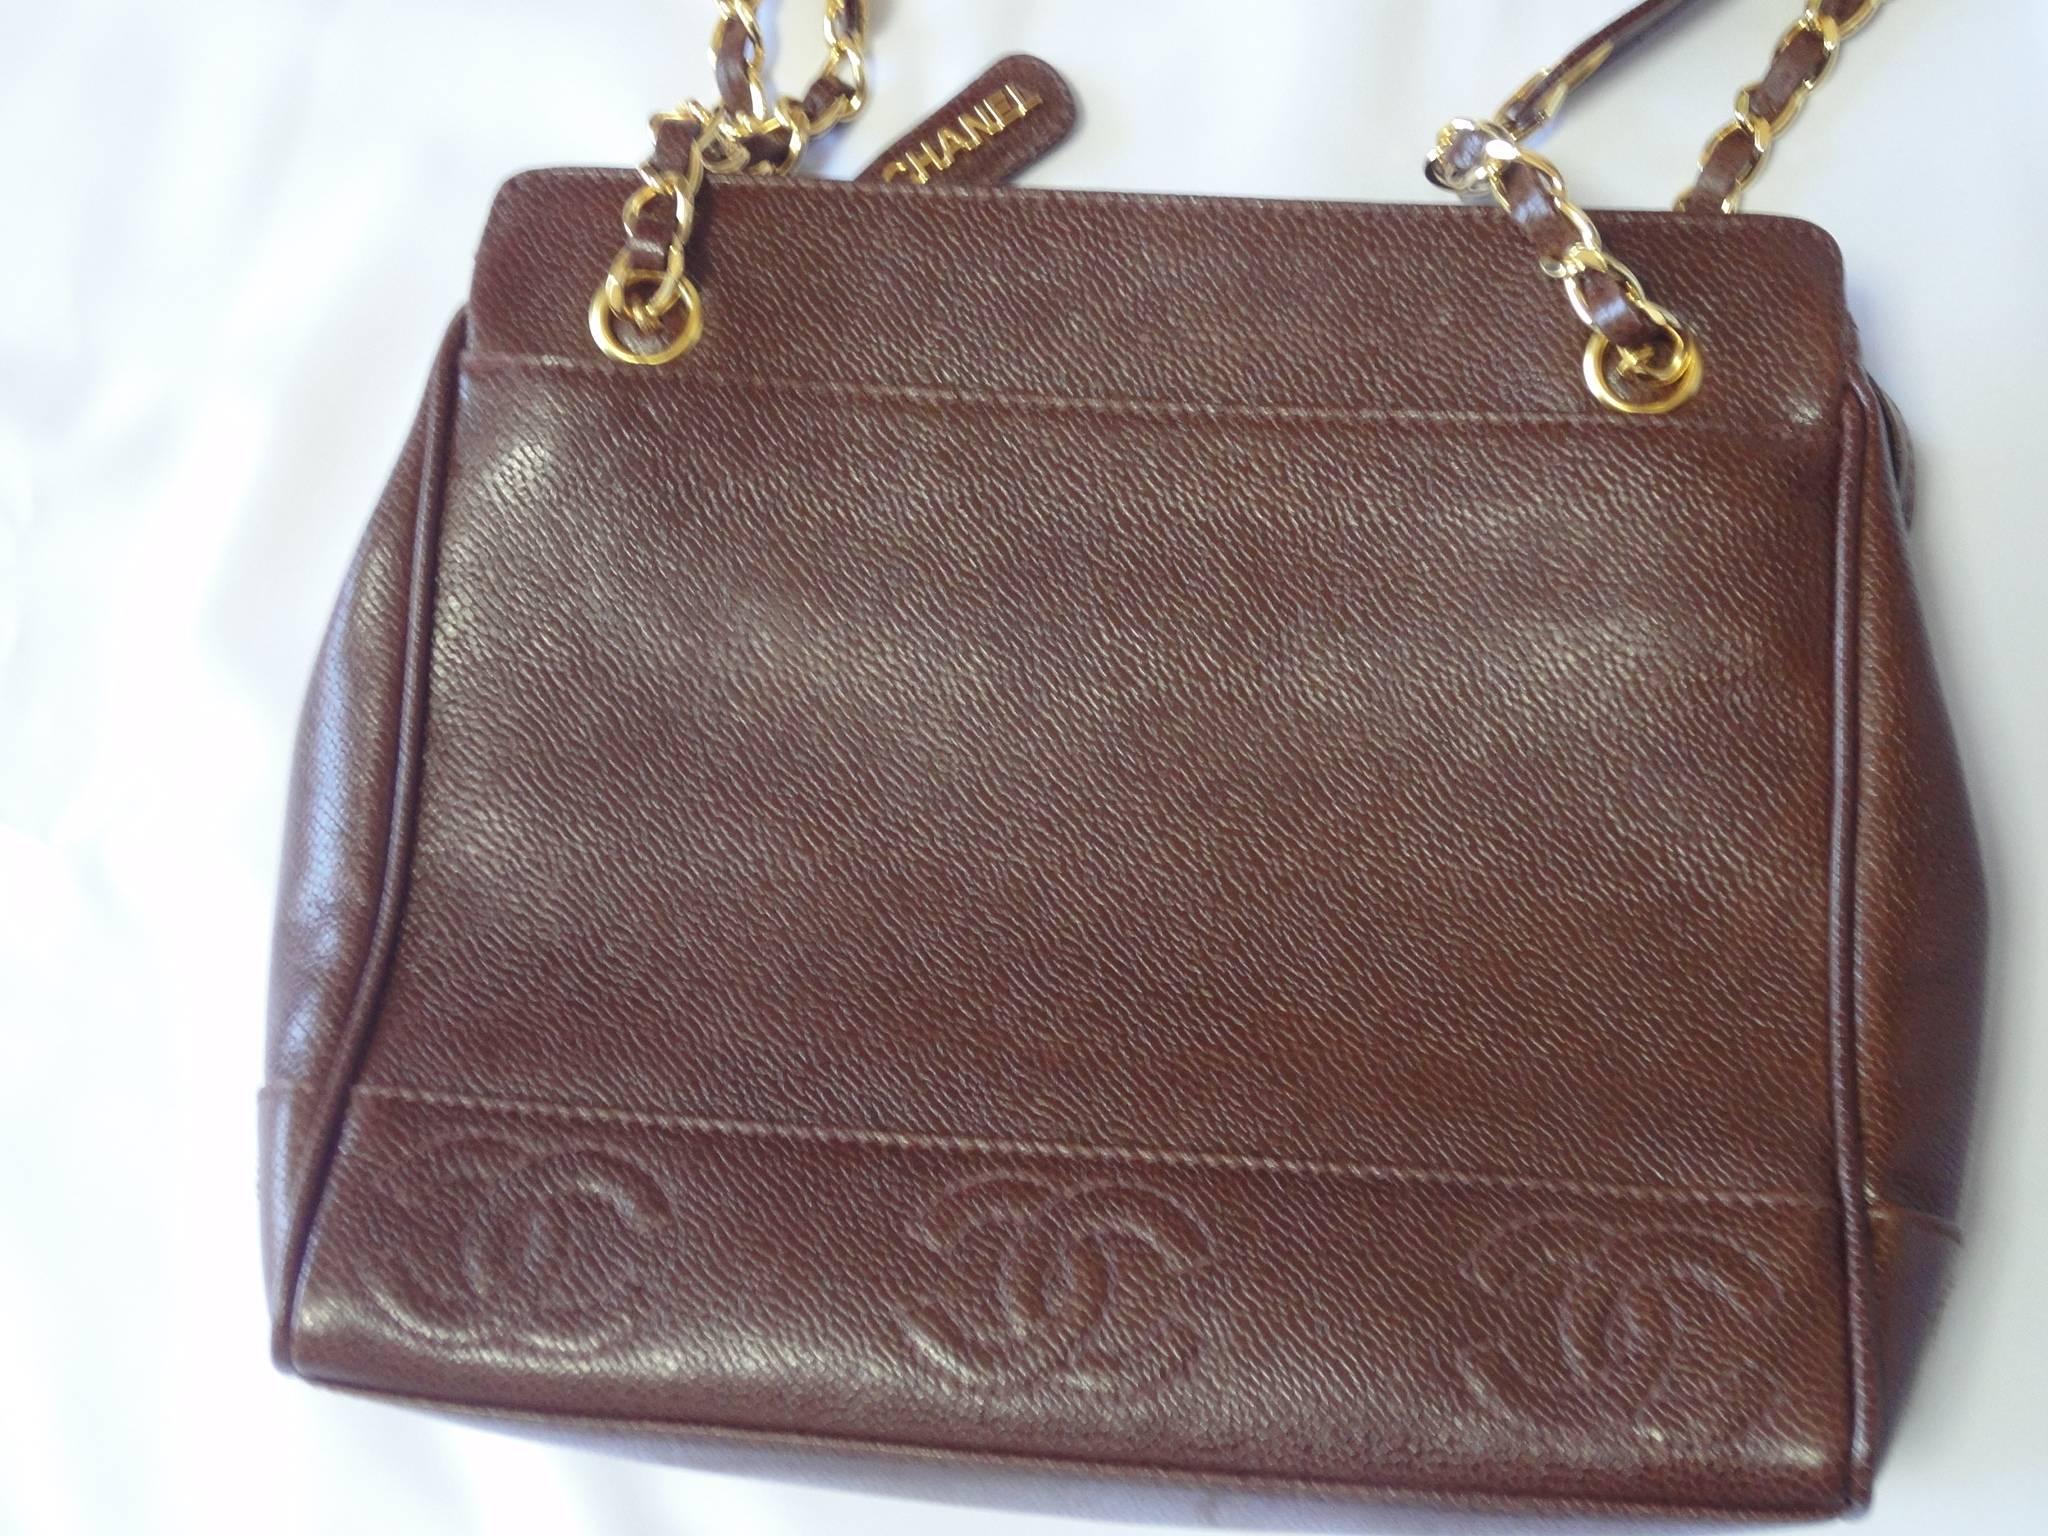 MINT. Vintage CHANEL dark brown caviar leather shoulder bag, tote with CC stitch marks and gold-tone chain and straps. Perfect daily use bag.

MINT, beautiful condition!! Just like NEW!

This is a vintage caviar leather chain shoulder tote bag in